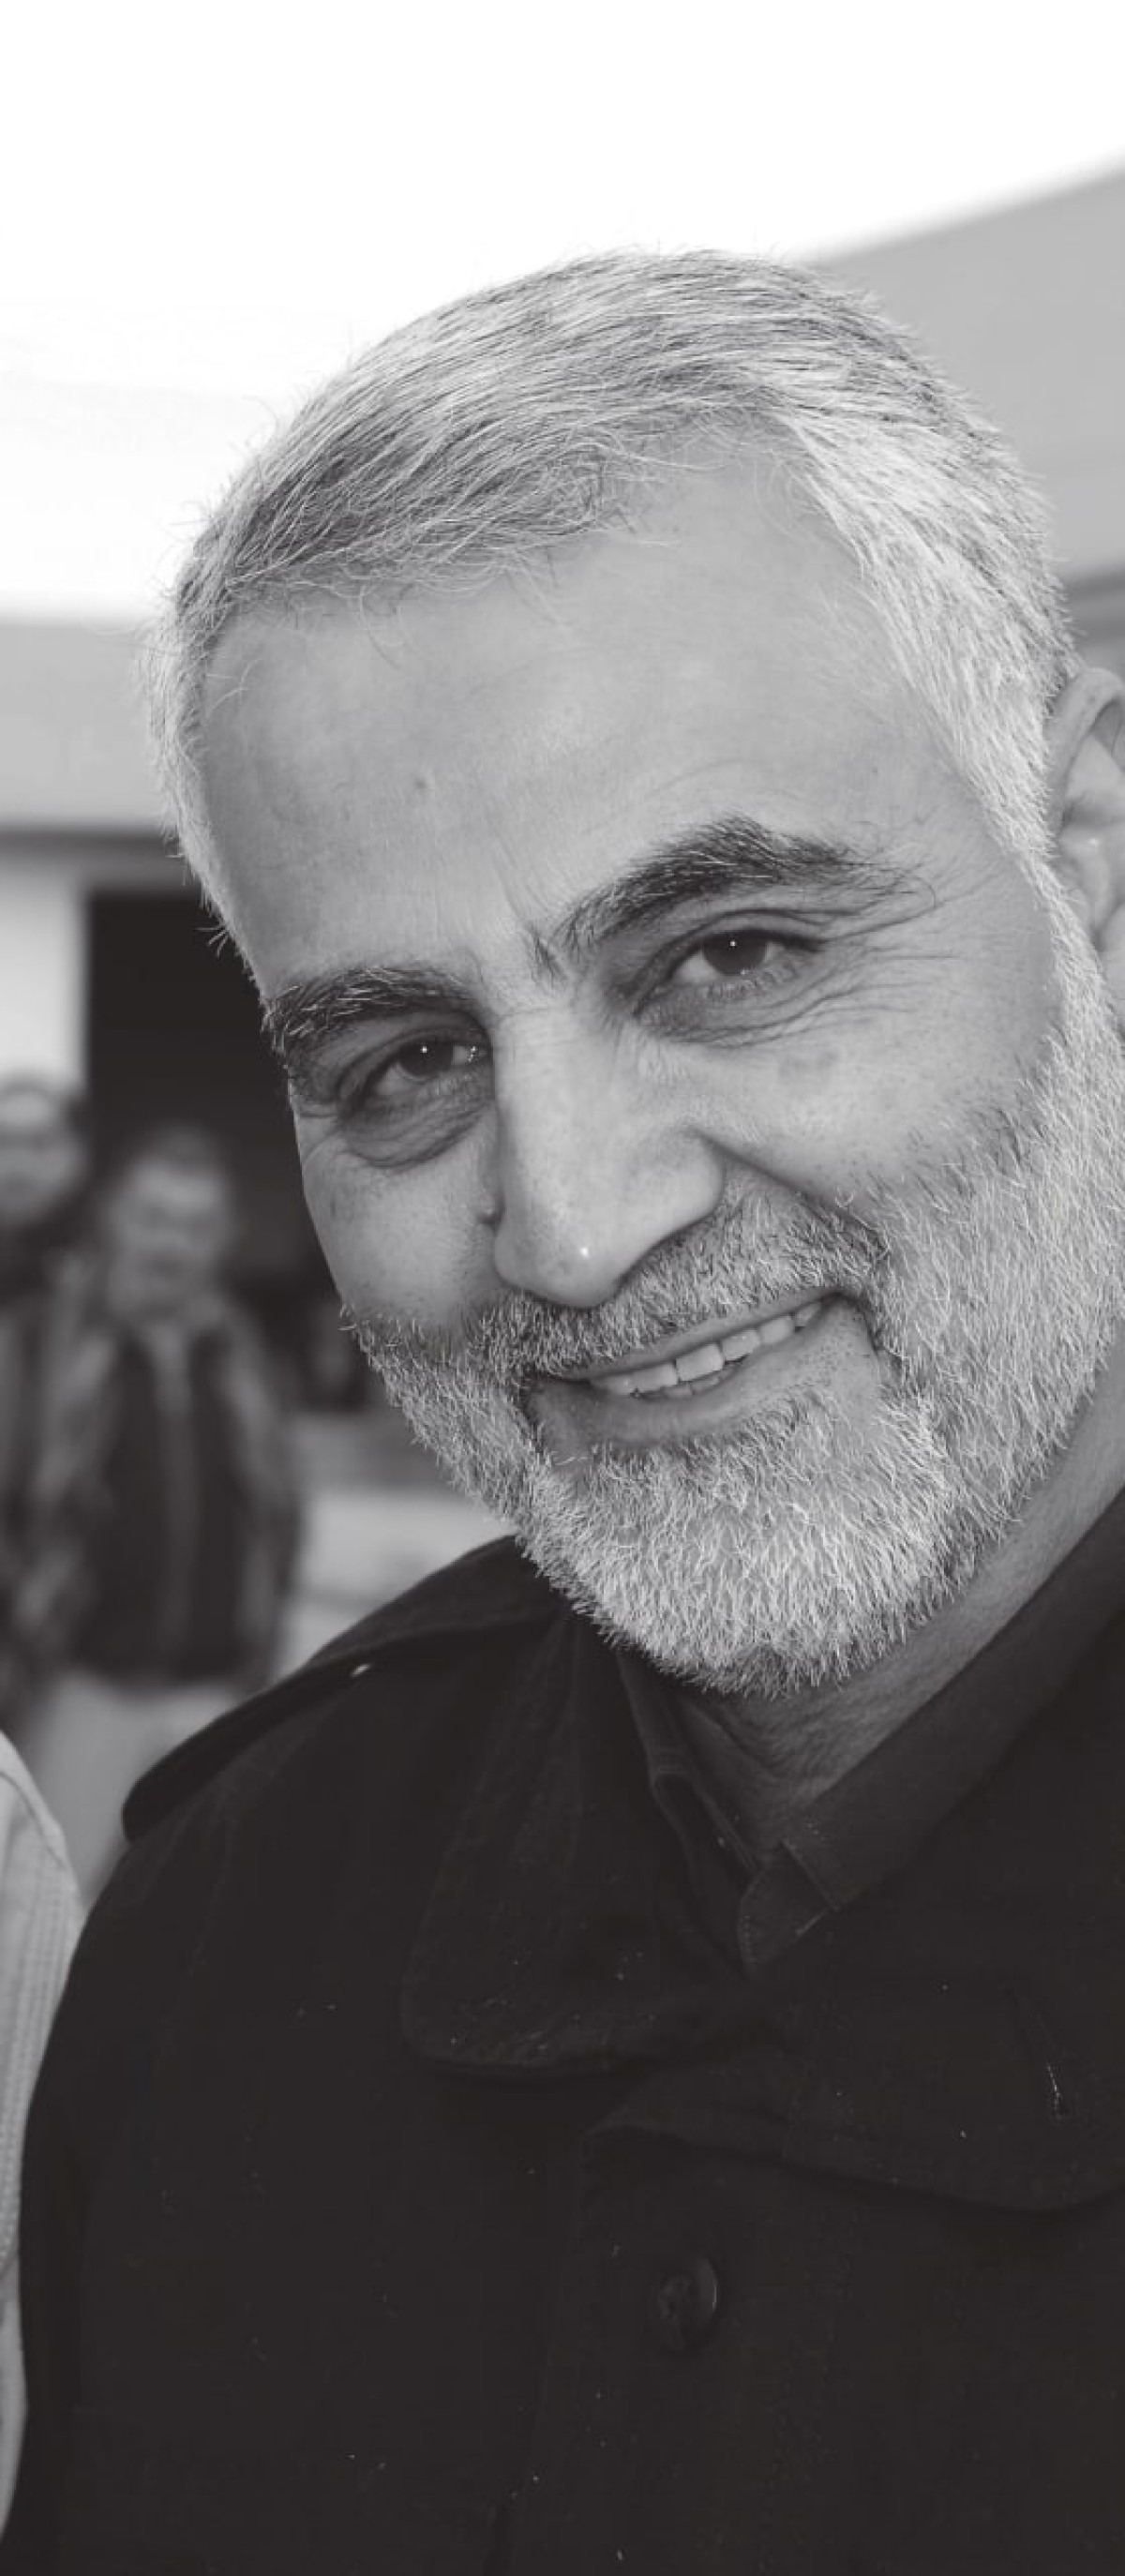 Qassem Soleimani and the battle against Western colonialism